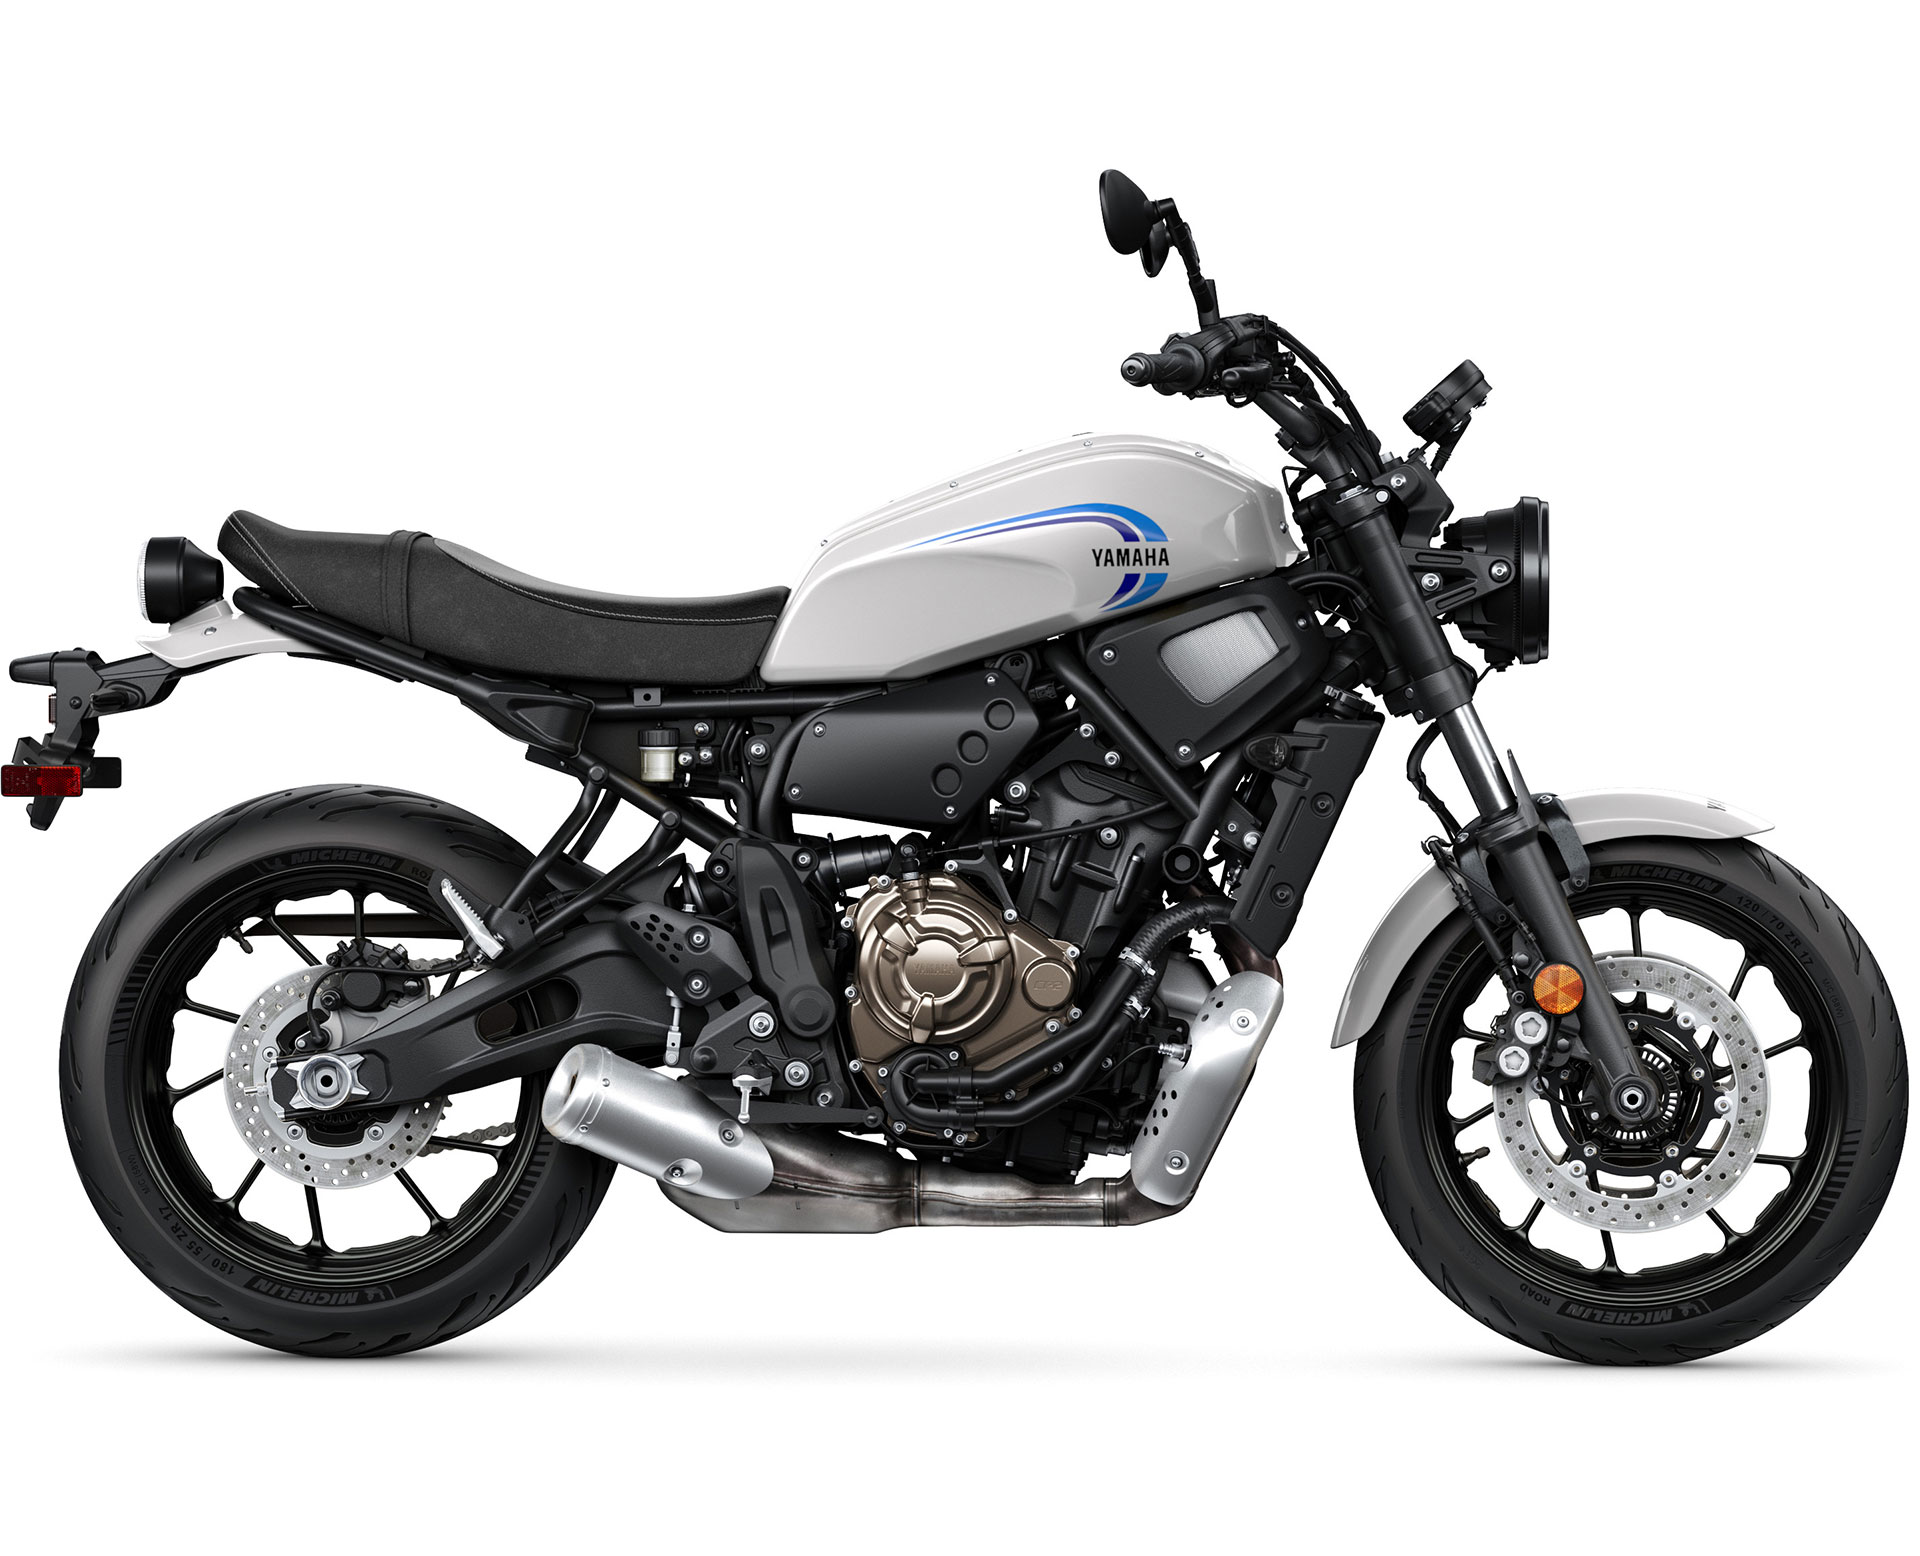 Thumbnail of your customized XSR700 2022